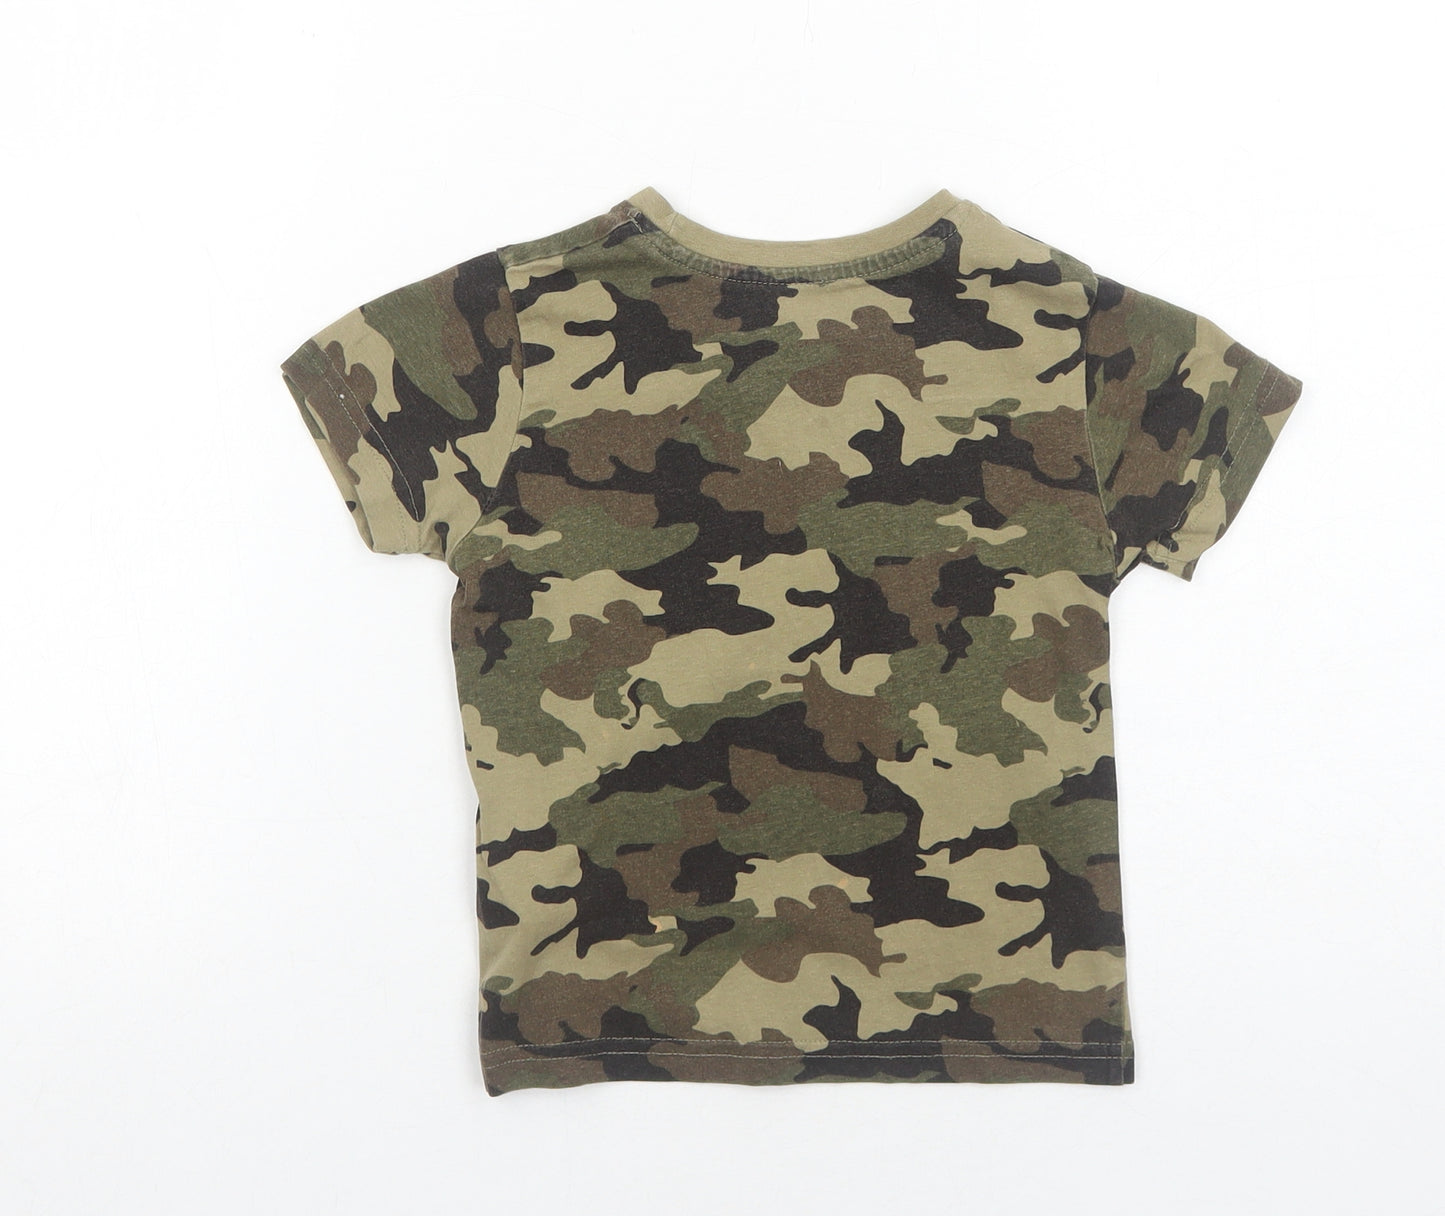 Primark Boys Green Camouflage Cotton Basic T-Shirt Size 2-3 Years Round Neck Pullover